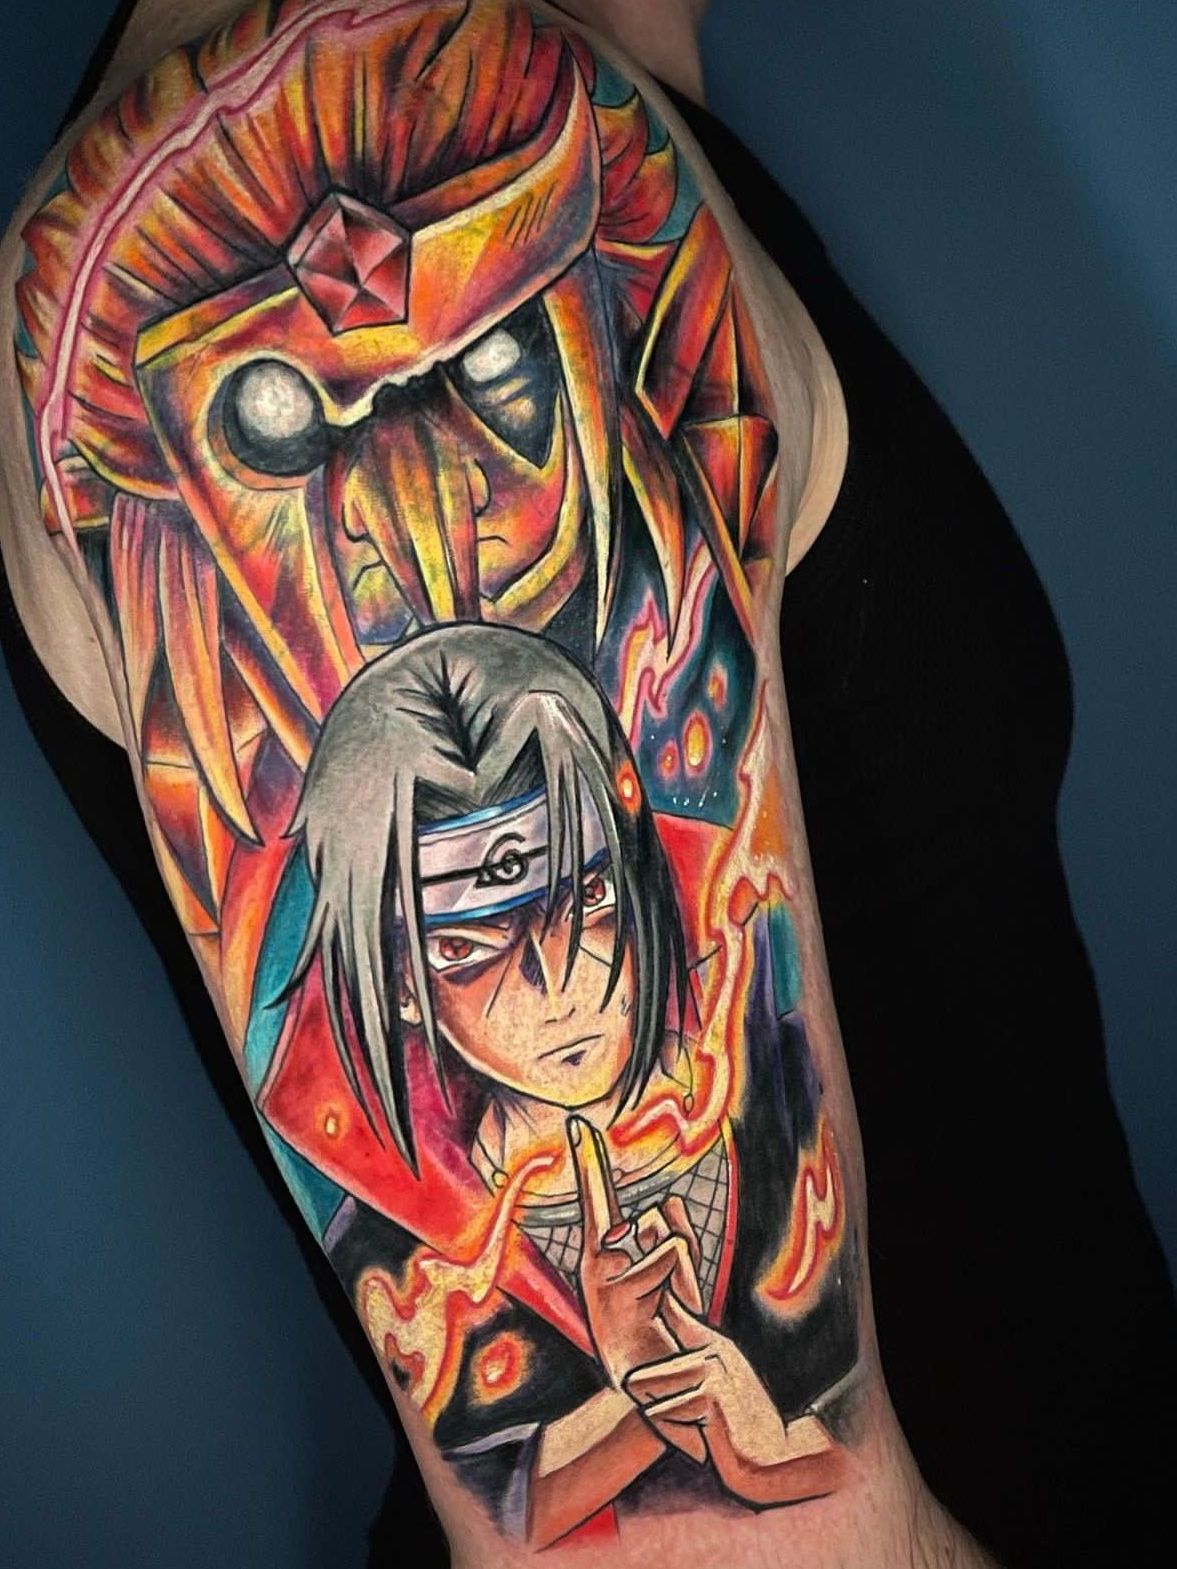 a person has a tattoo of Itachi Uchiha from Naruto on their arm.